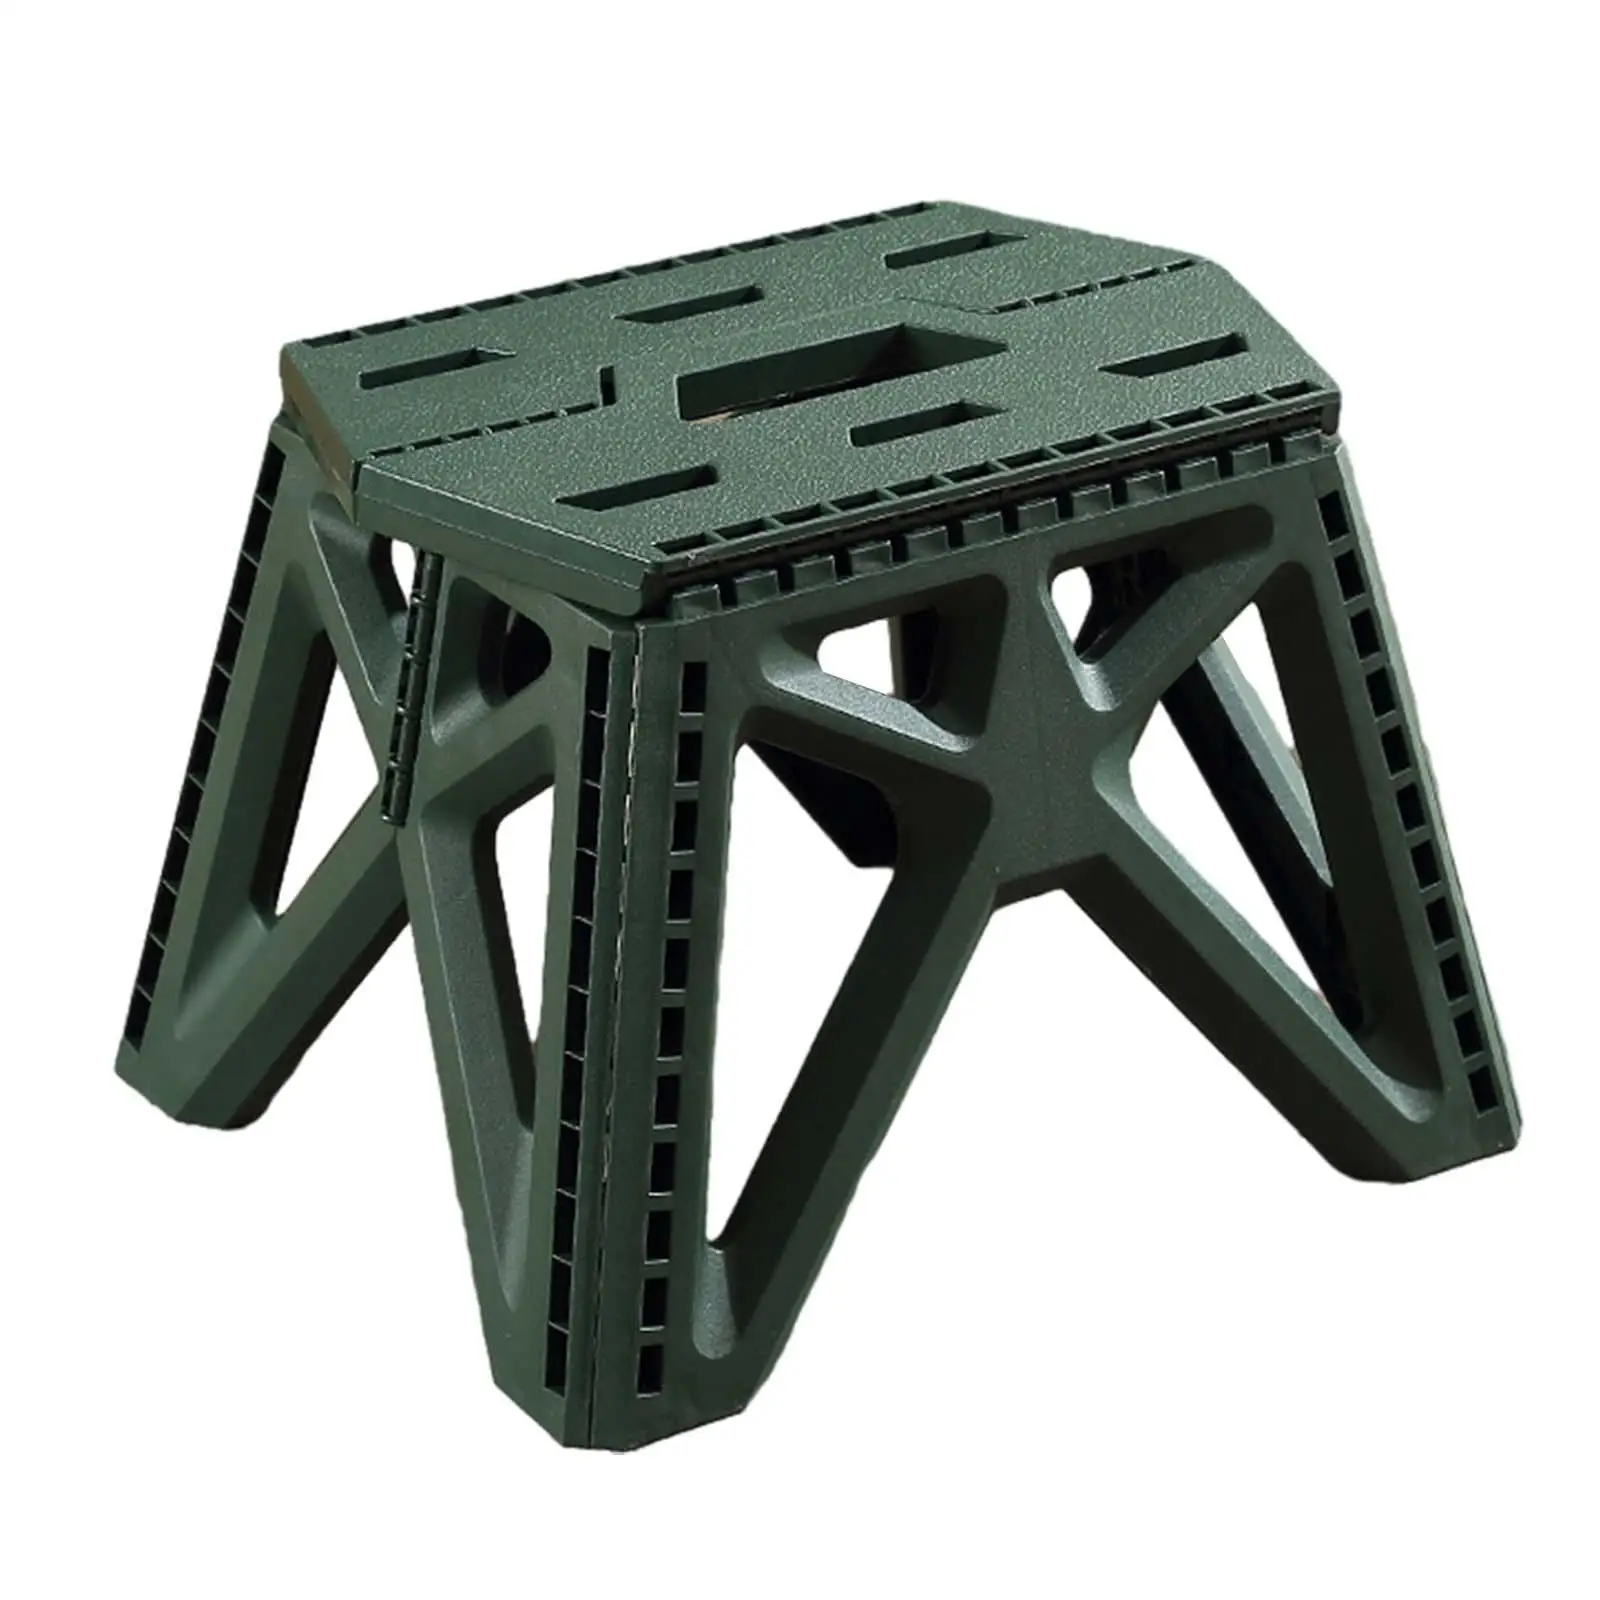 Camping Folding Stool Outside Compact Camp Stool Camping Chair Outdoor Foldable Stool for Garden Backpacking Beach Fishing Patio